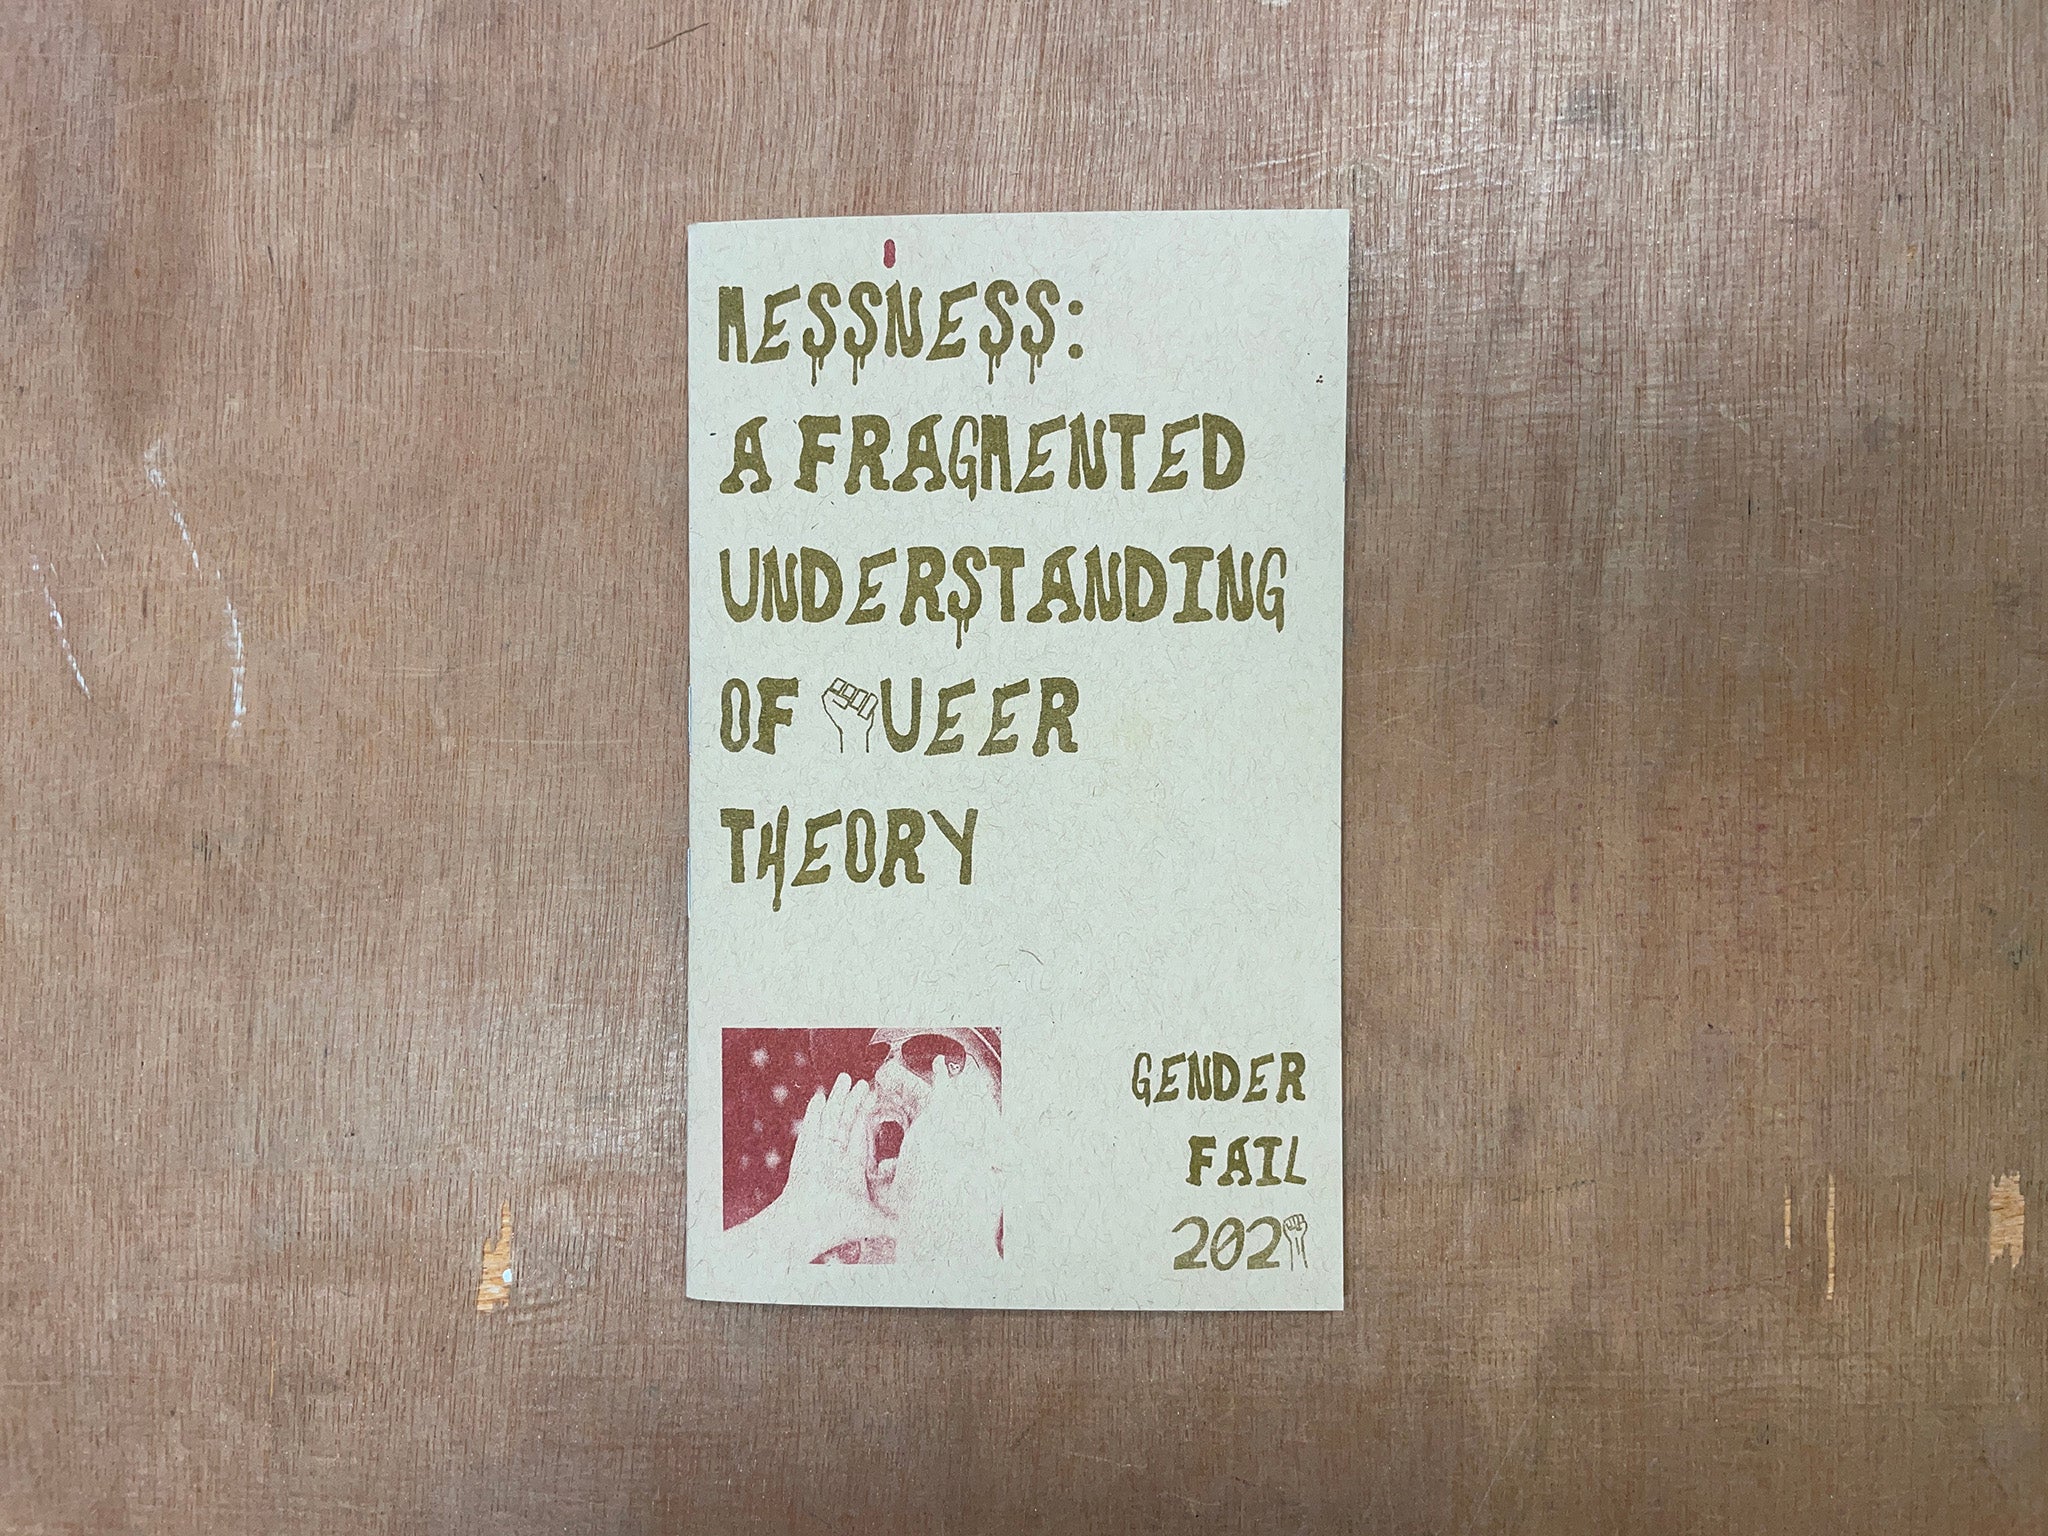 MESSINESS: A FRAGMENTED UNDERSTANDING OF QUEER THEORY by Be Oakley